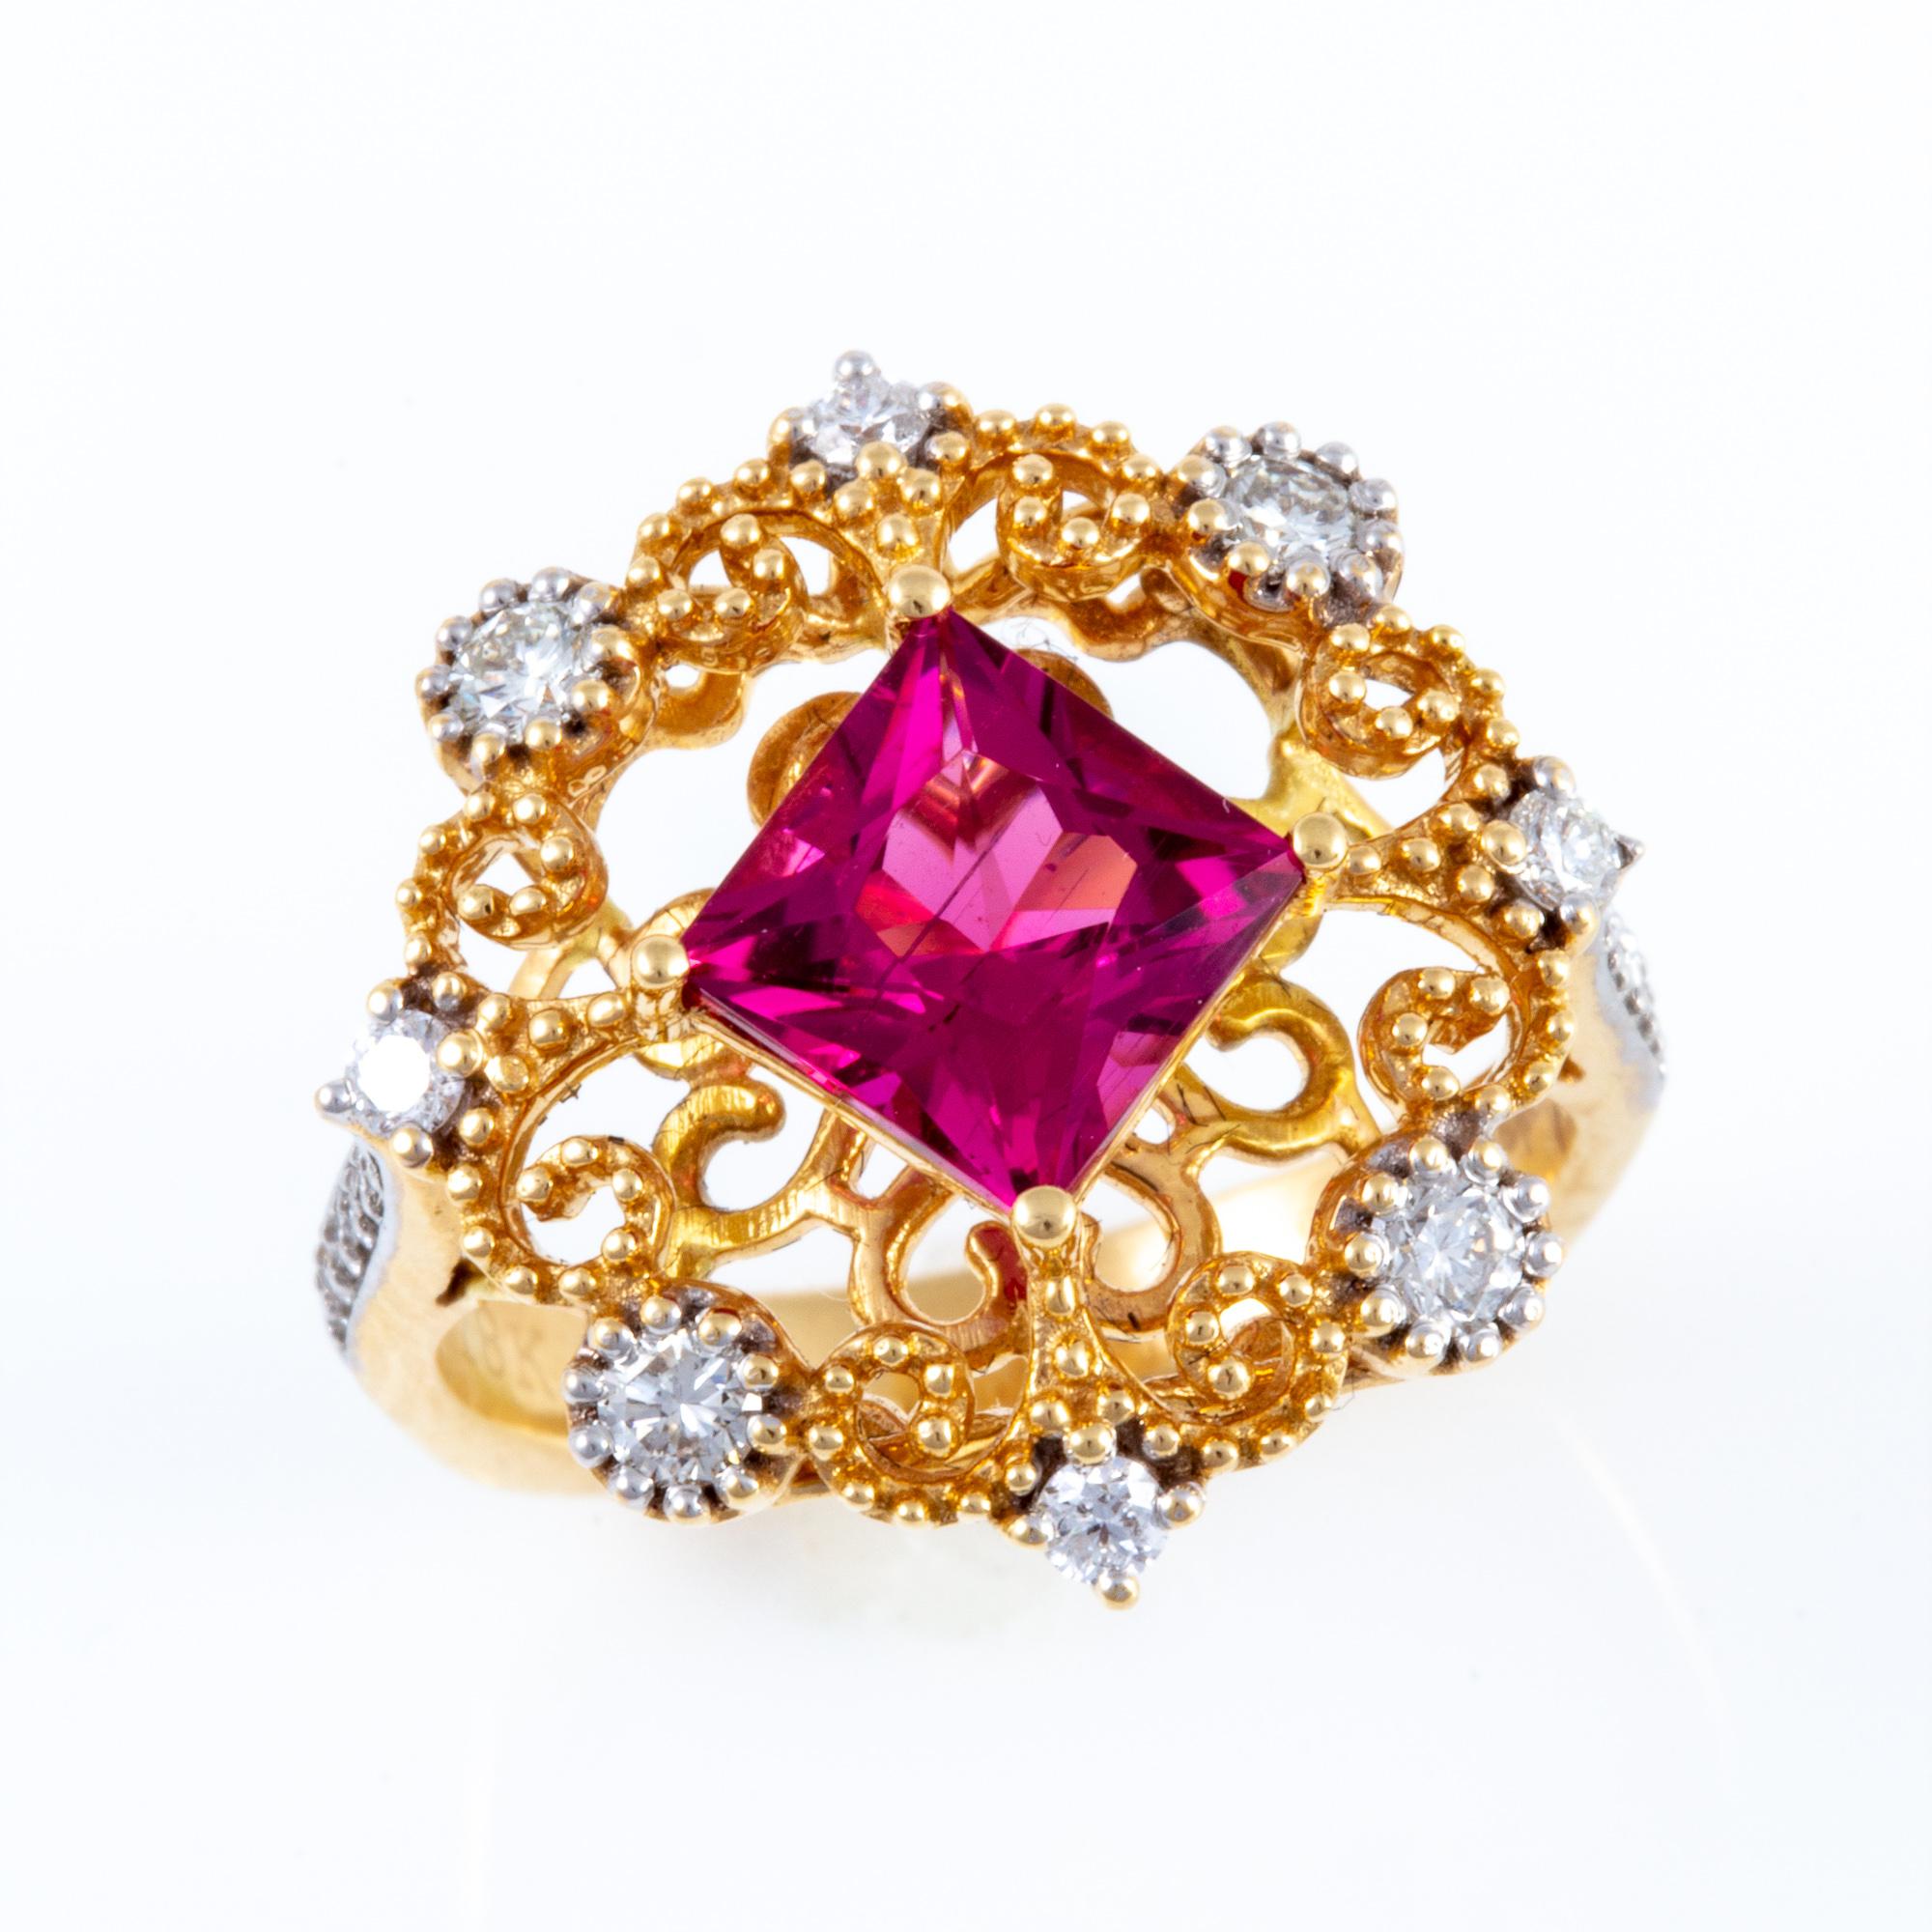 Rubellite Tourmaline and Diamond Ring set in 18 kt Gold For Sale 2